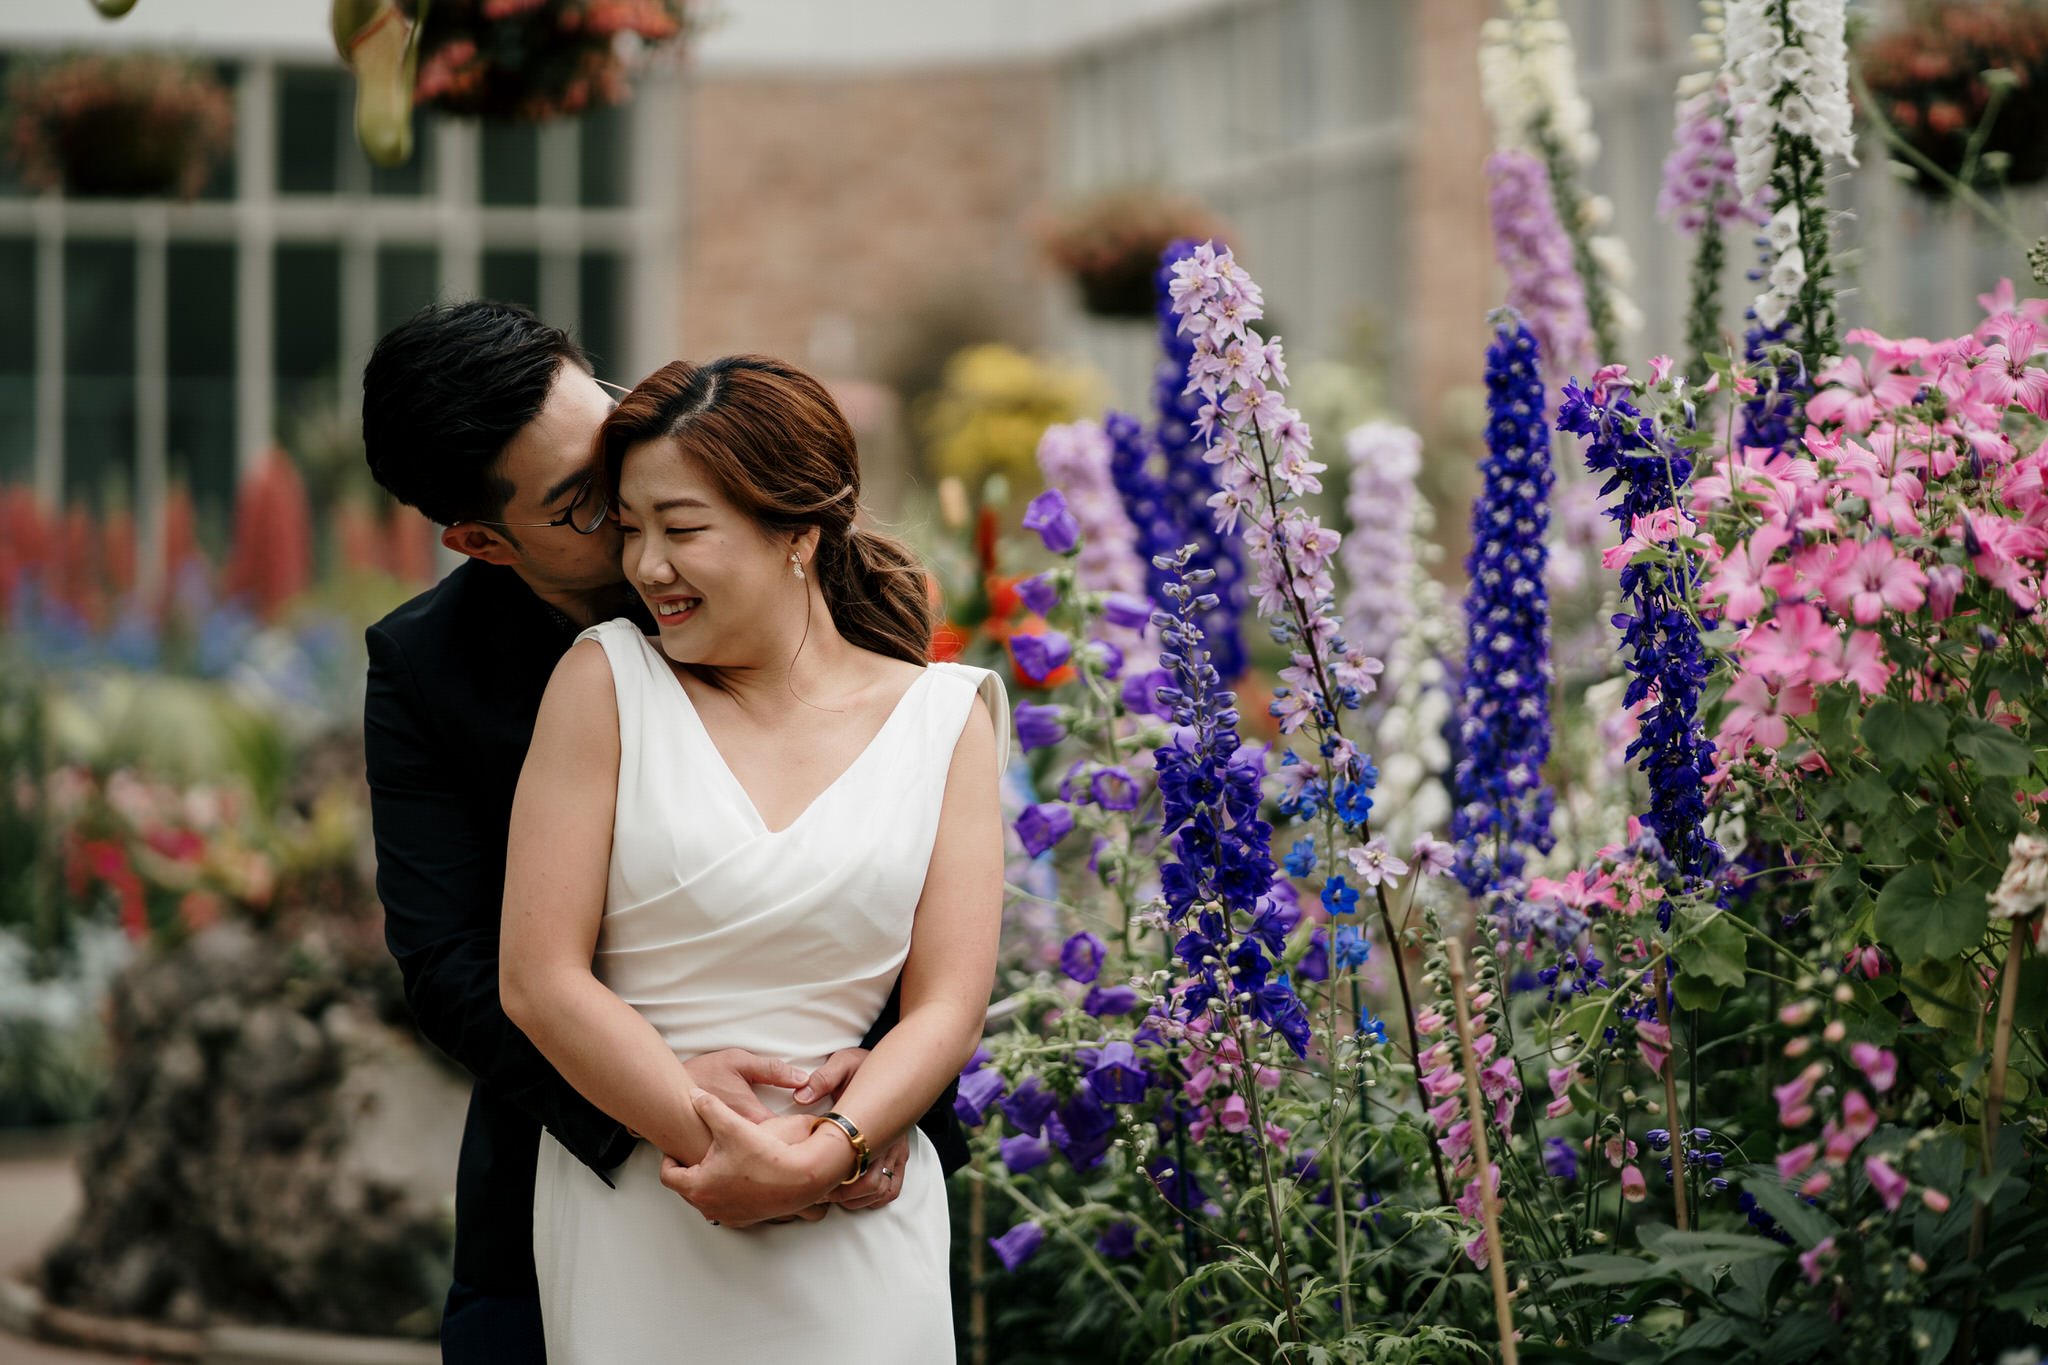 auckland-wedding-photographer-videographer-story-by-koo-koo's-jewelry-dear-white-productions-pre-wedding-engagement-photo-glass-house-botanic-fernery-garden (17).JPG